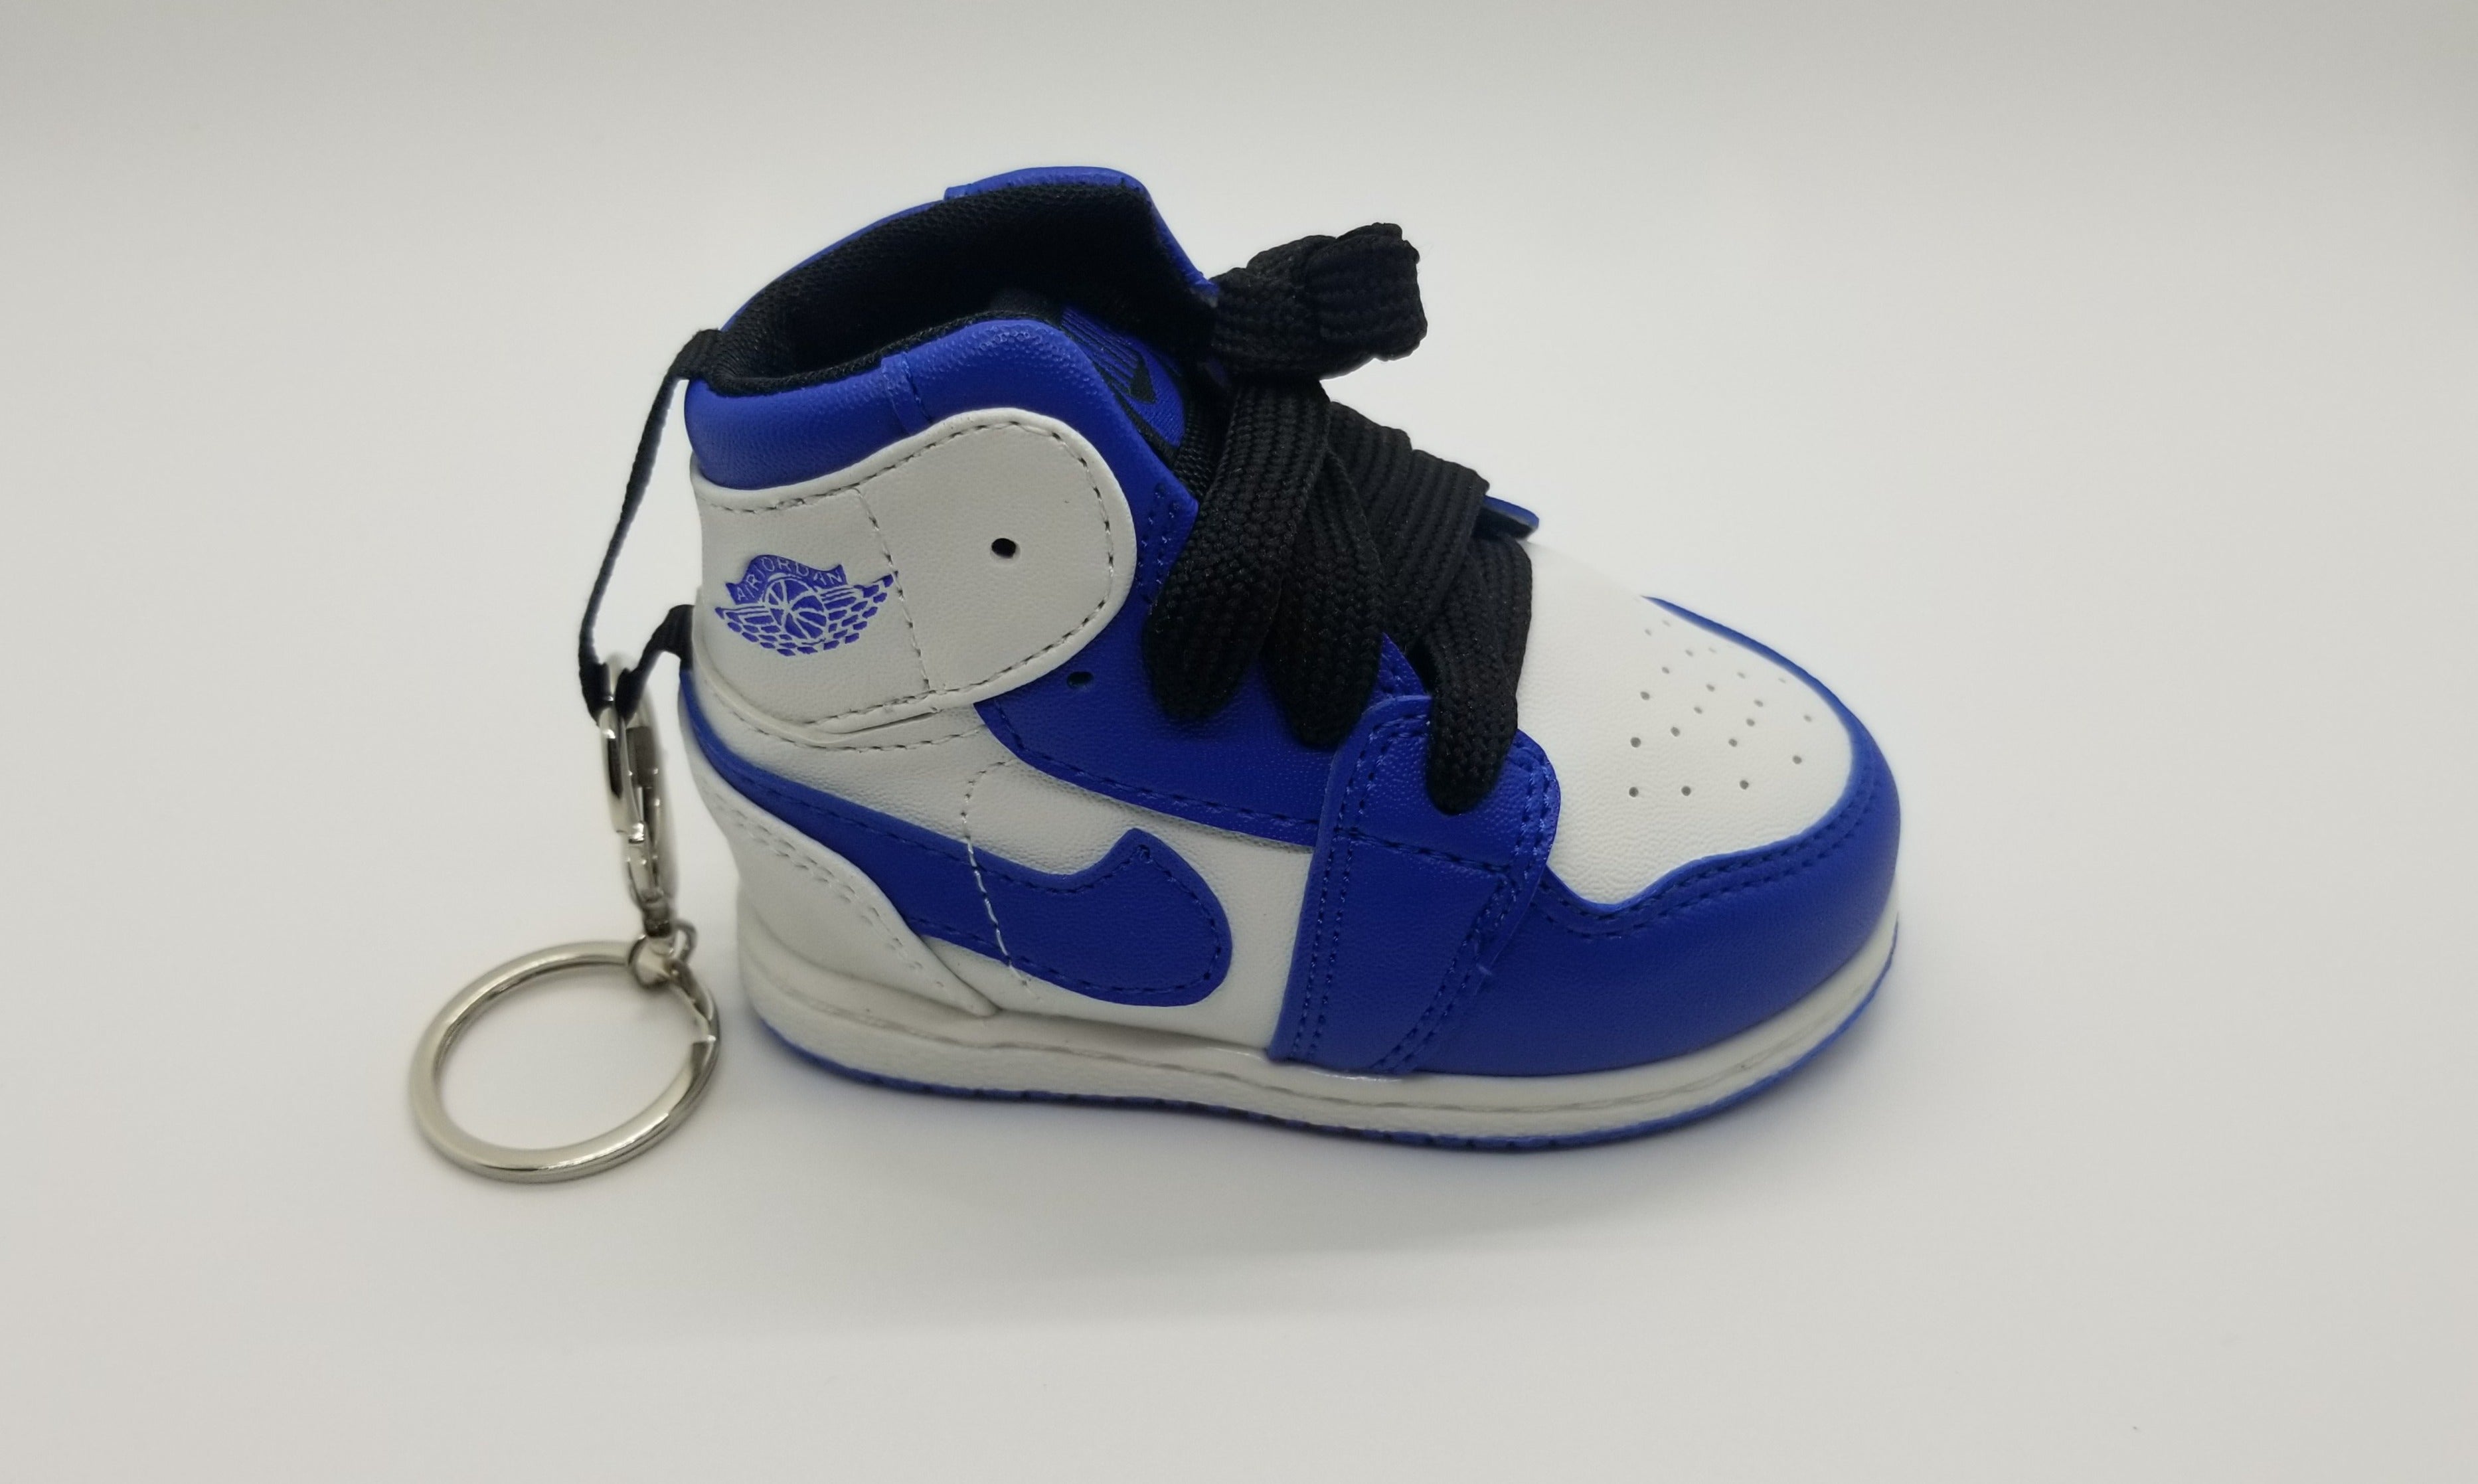 Blue and White Sneaker Portable Power Bank Charger with Keychain-Czone Avenue